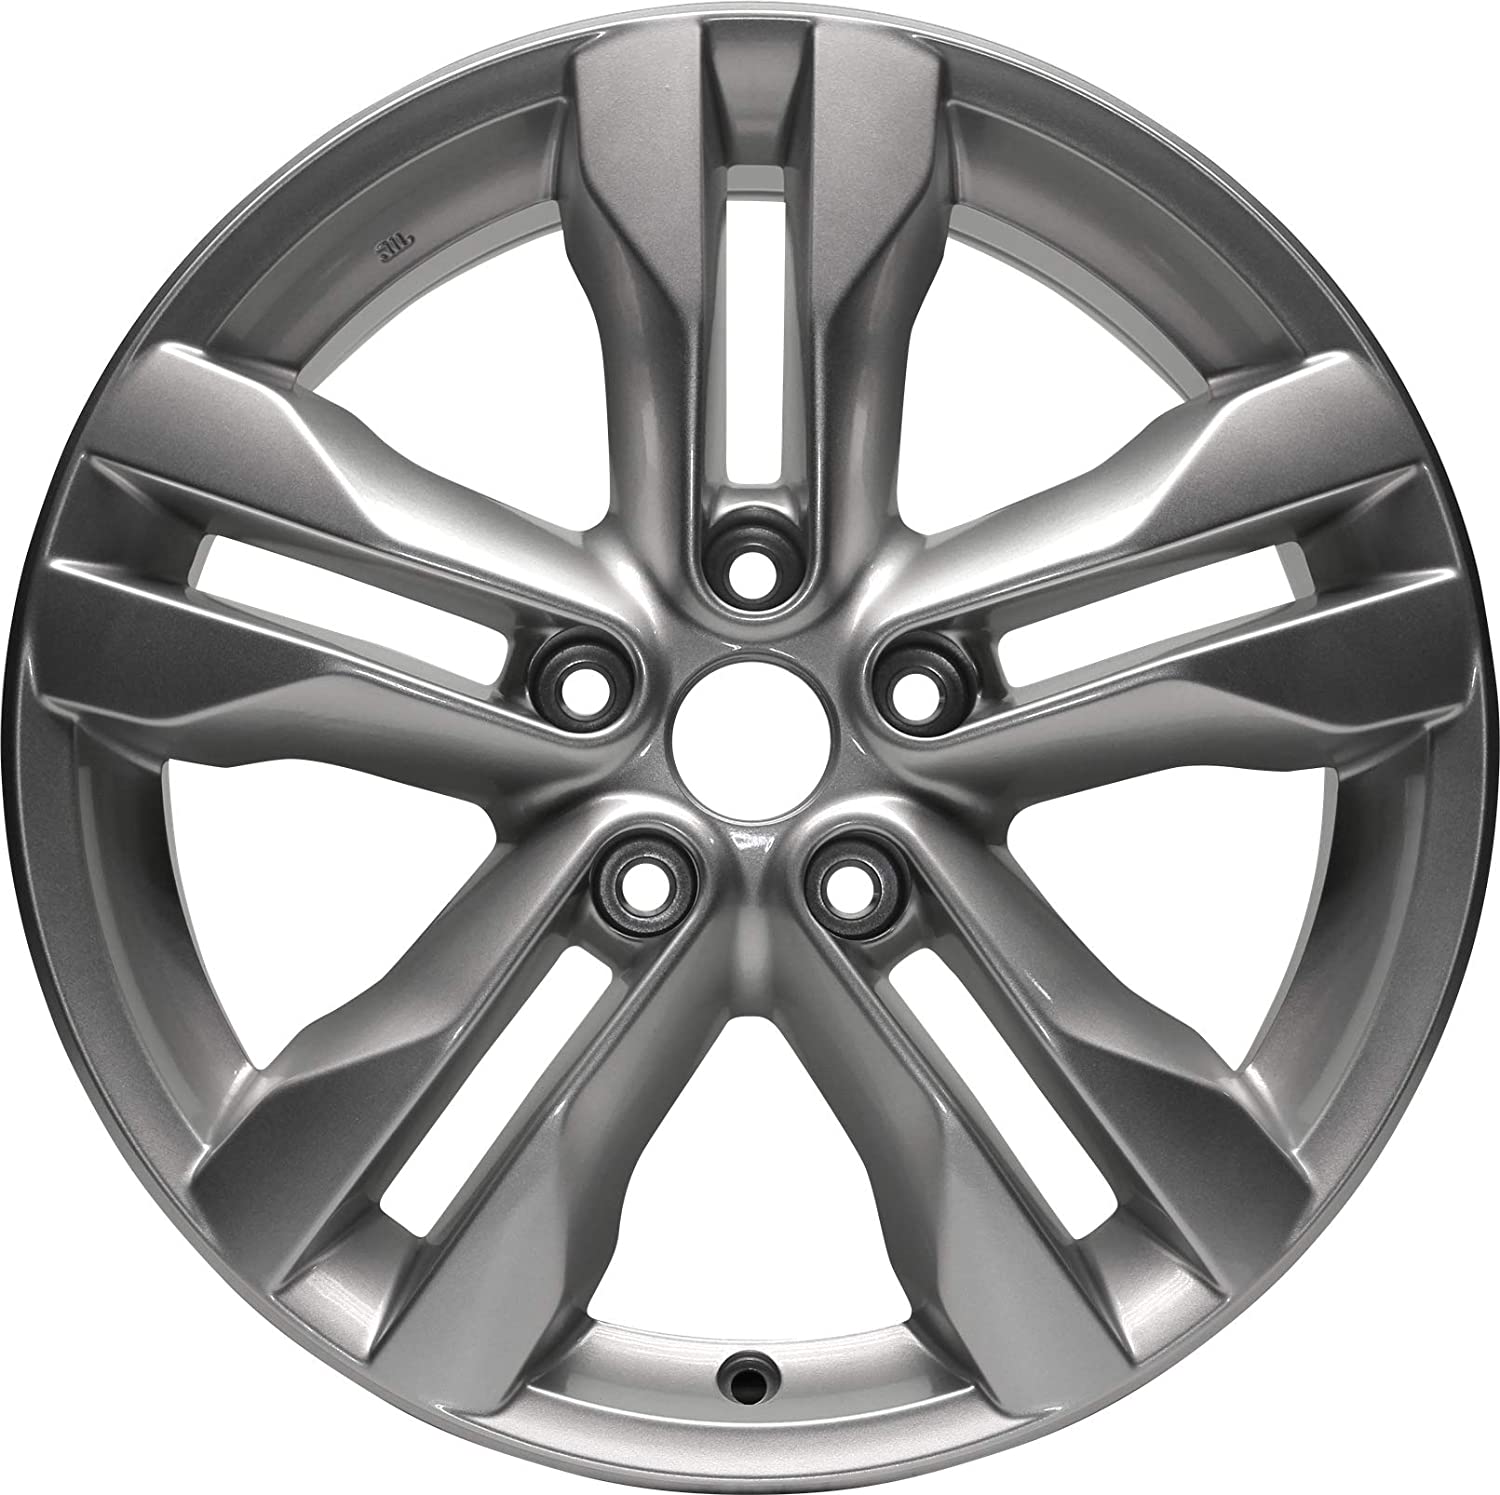 10 Best Rims For Nissan Rogue Wonderful Engineering